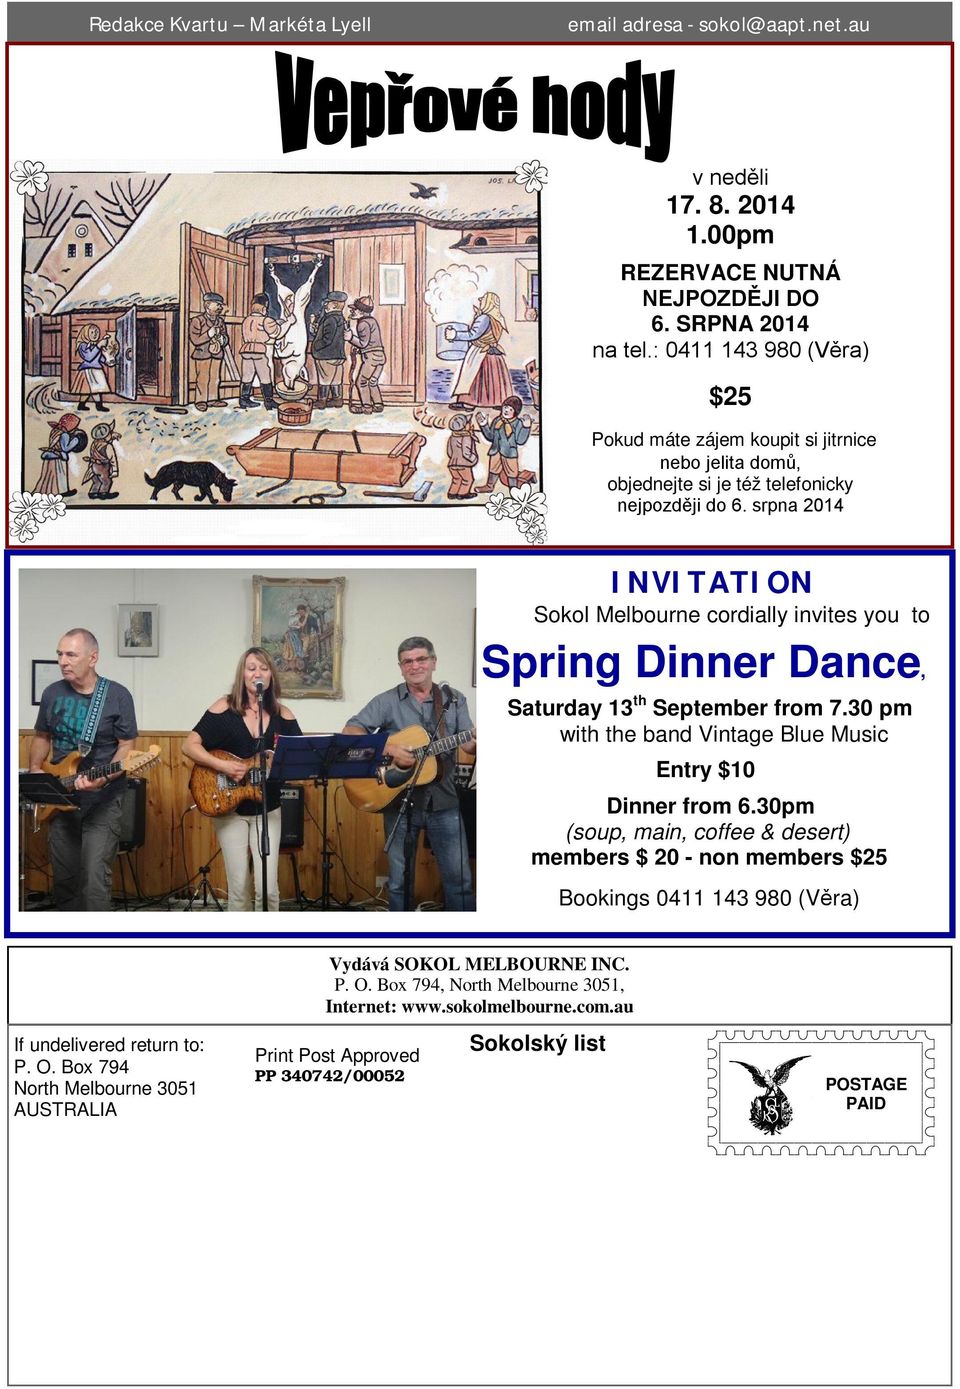 srpna 2014 INVITATION Sokol Melbourne cordially invites you to Spring Dinner Dance, Saturday 13 th September from 7.30 pm with the band Vintage Blue Music Entry $10 Dinner from 6.